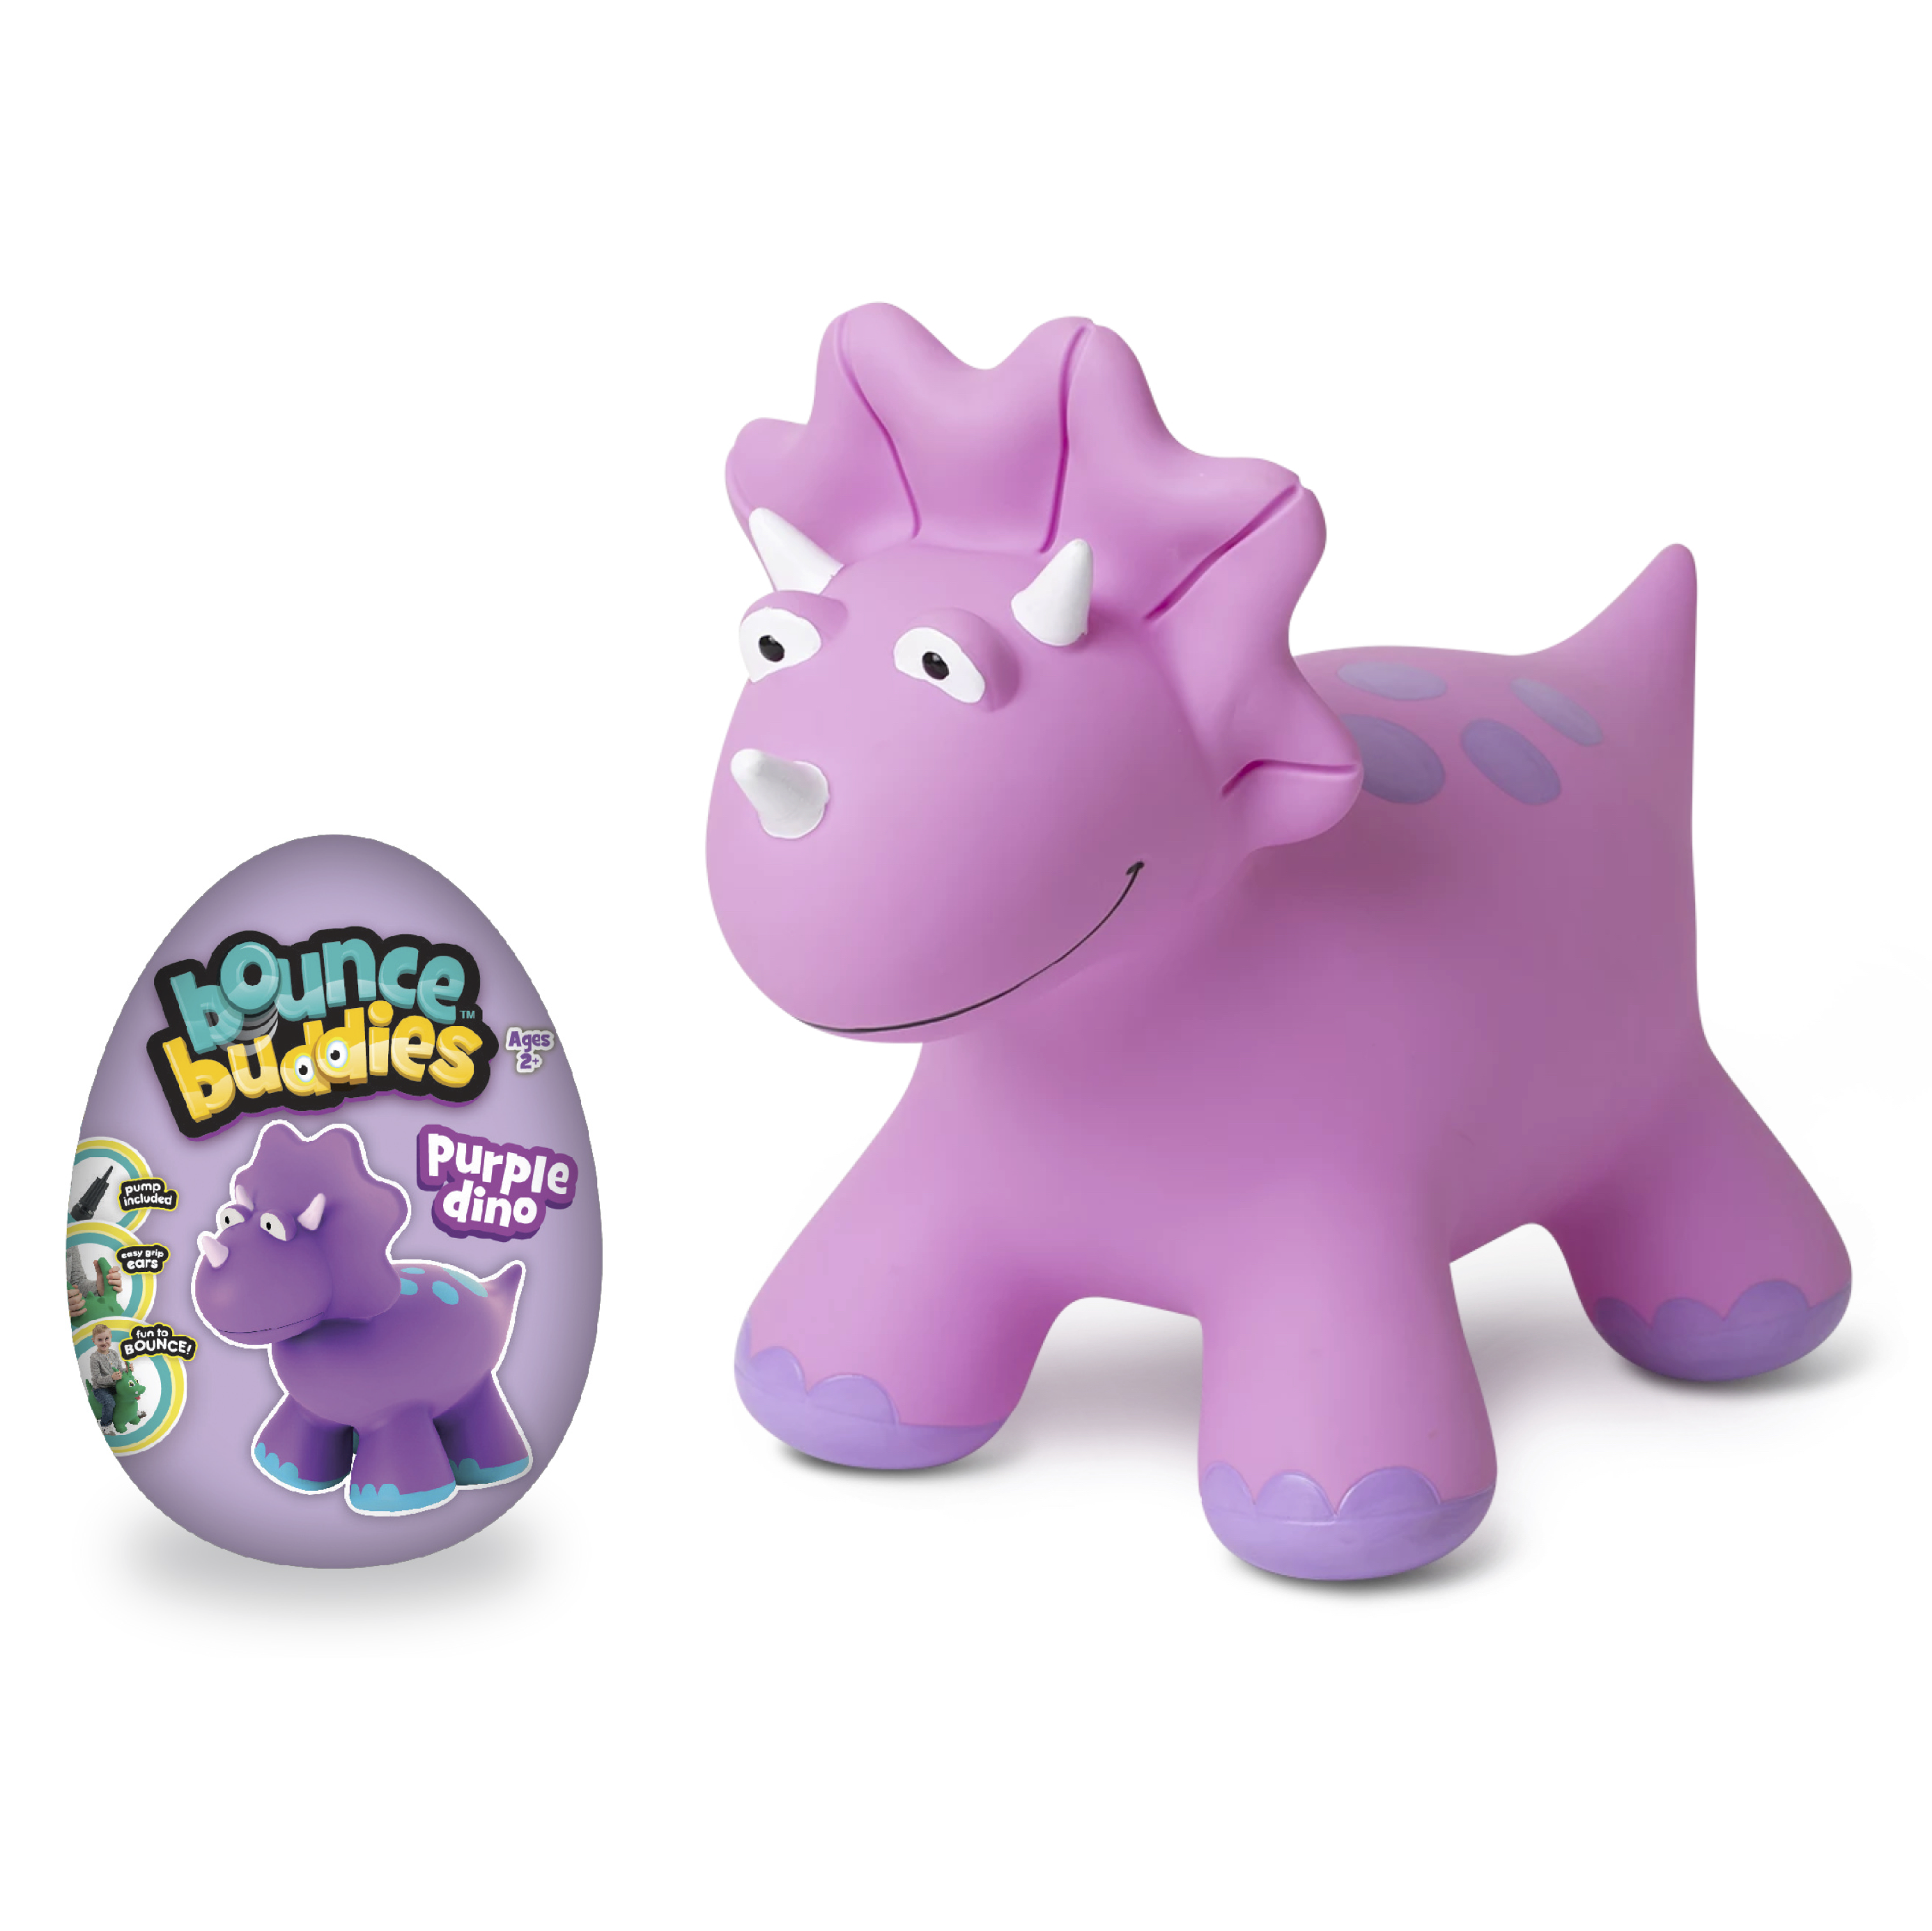 Bounce Buddies Dino Now Just $5.00 at Walmart!!